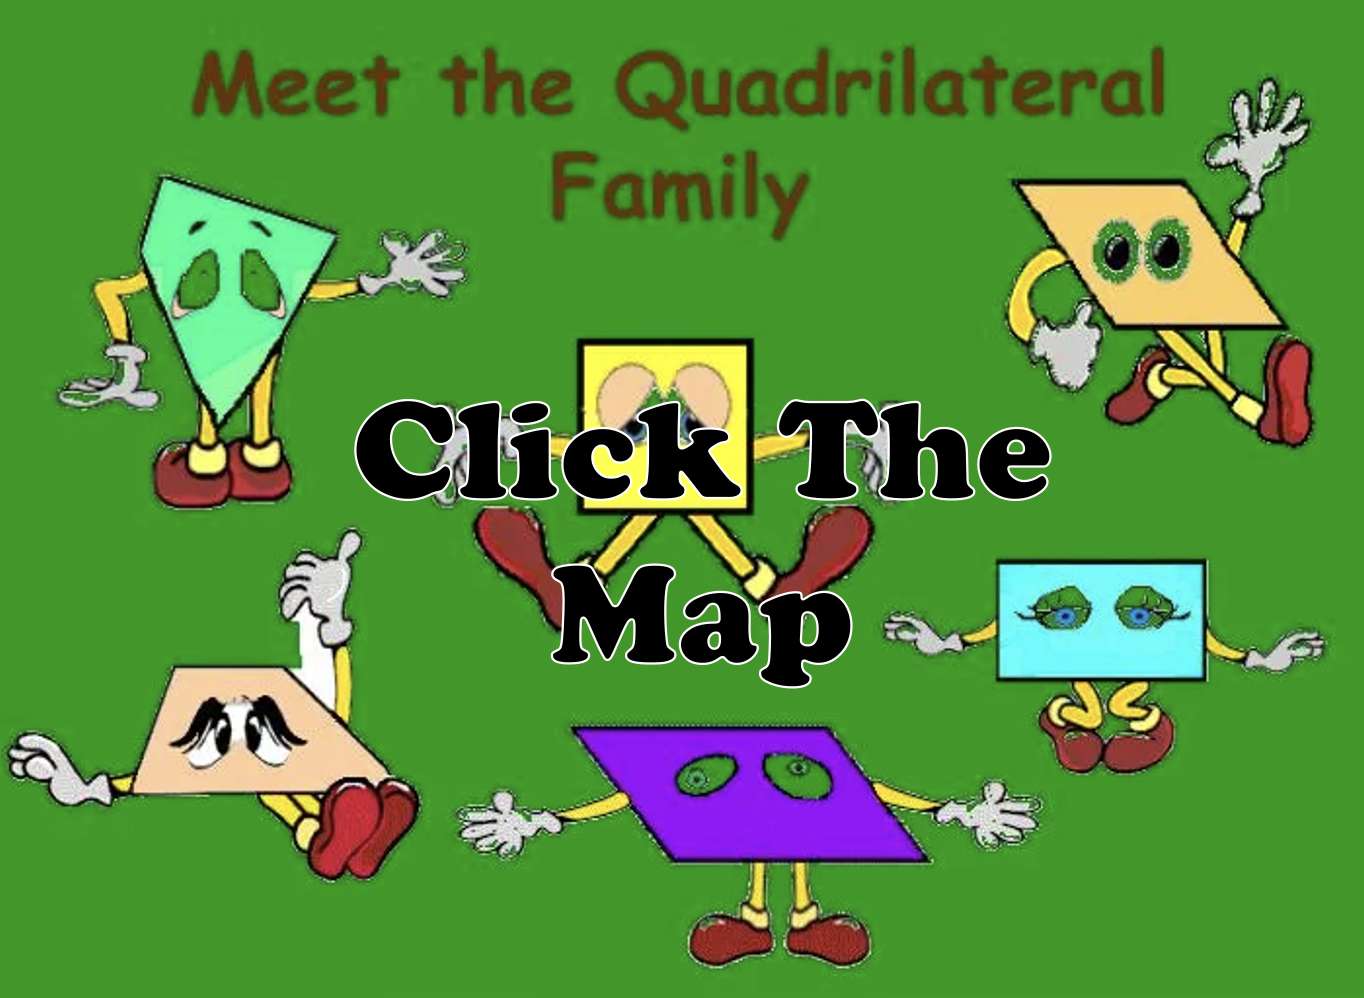 Quadrilateral Family Tree online puzzle